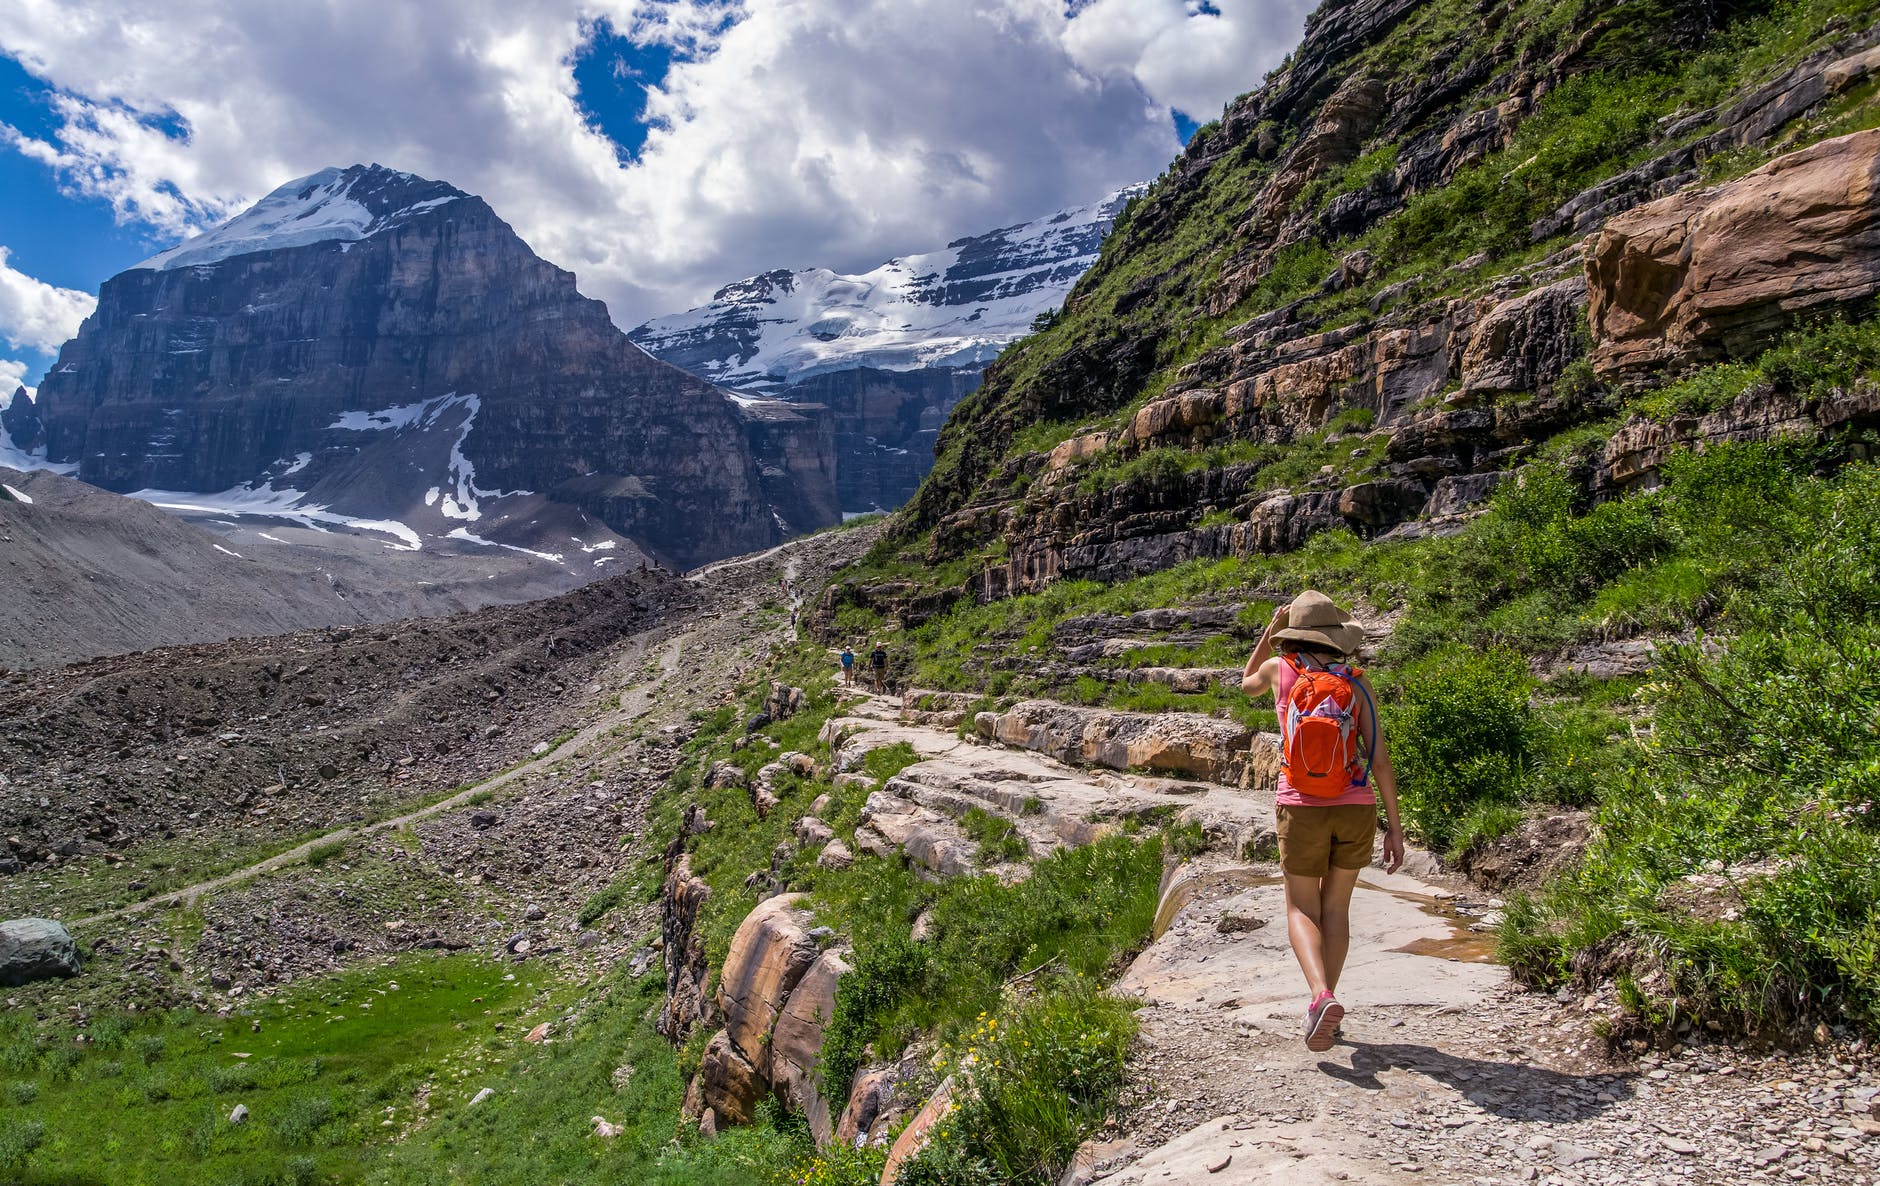 A person walking along a path in the mountains - get tips for adventure travel for women from Wanderful